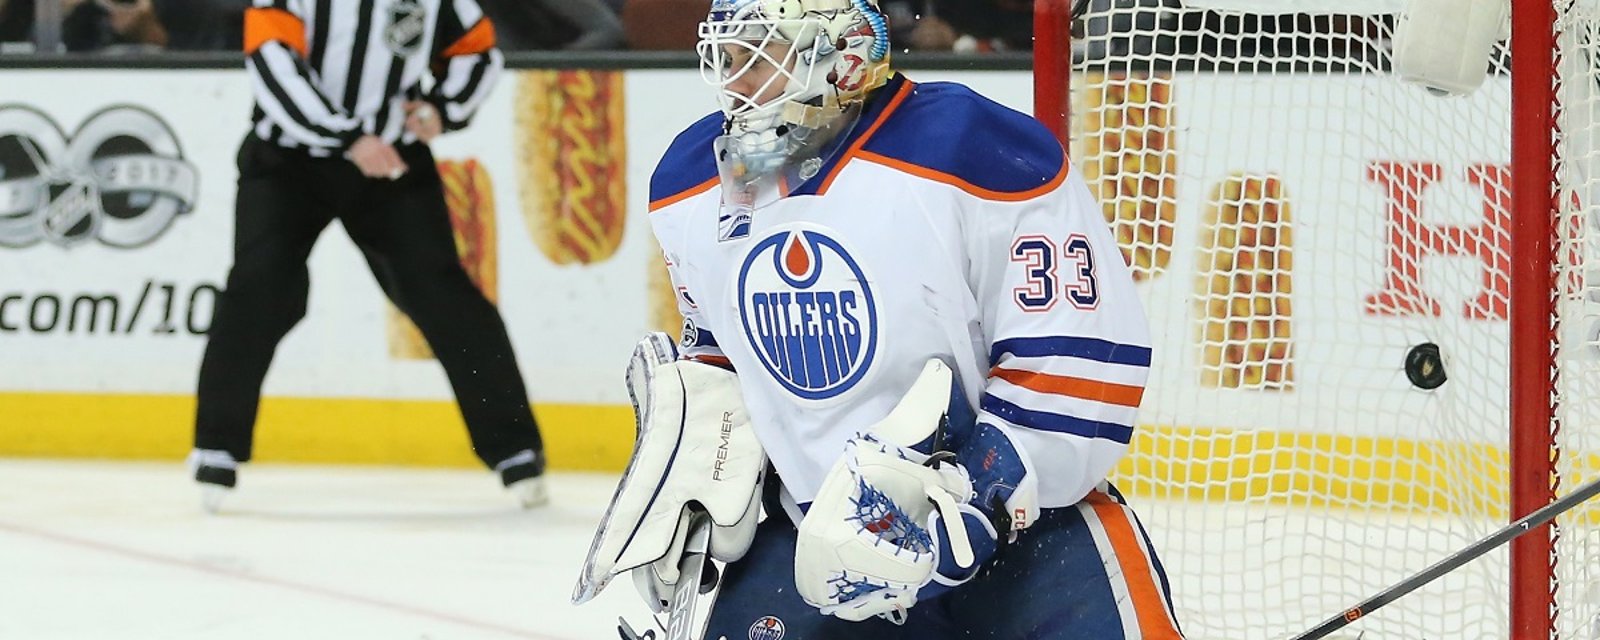 Breaking: Cam Talbot has reportedly been injured.